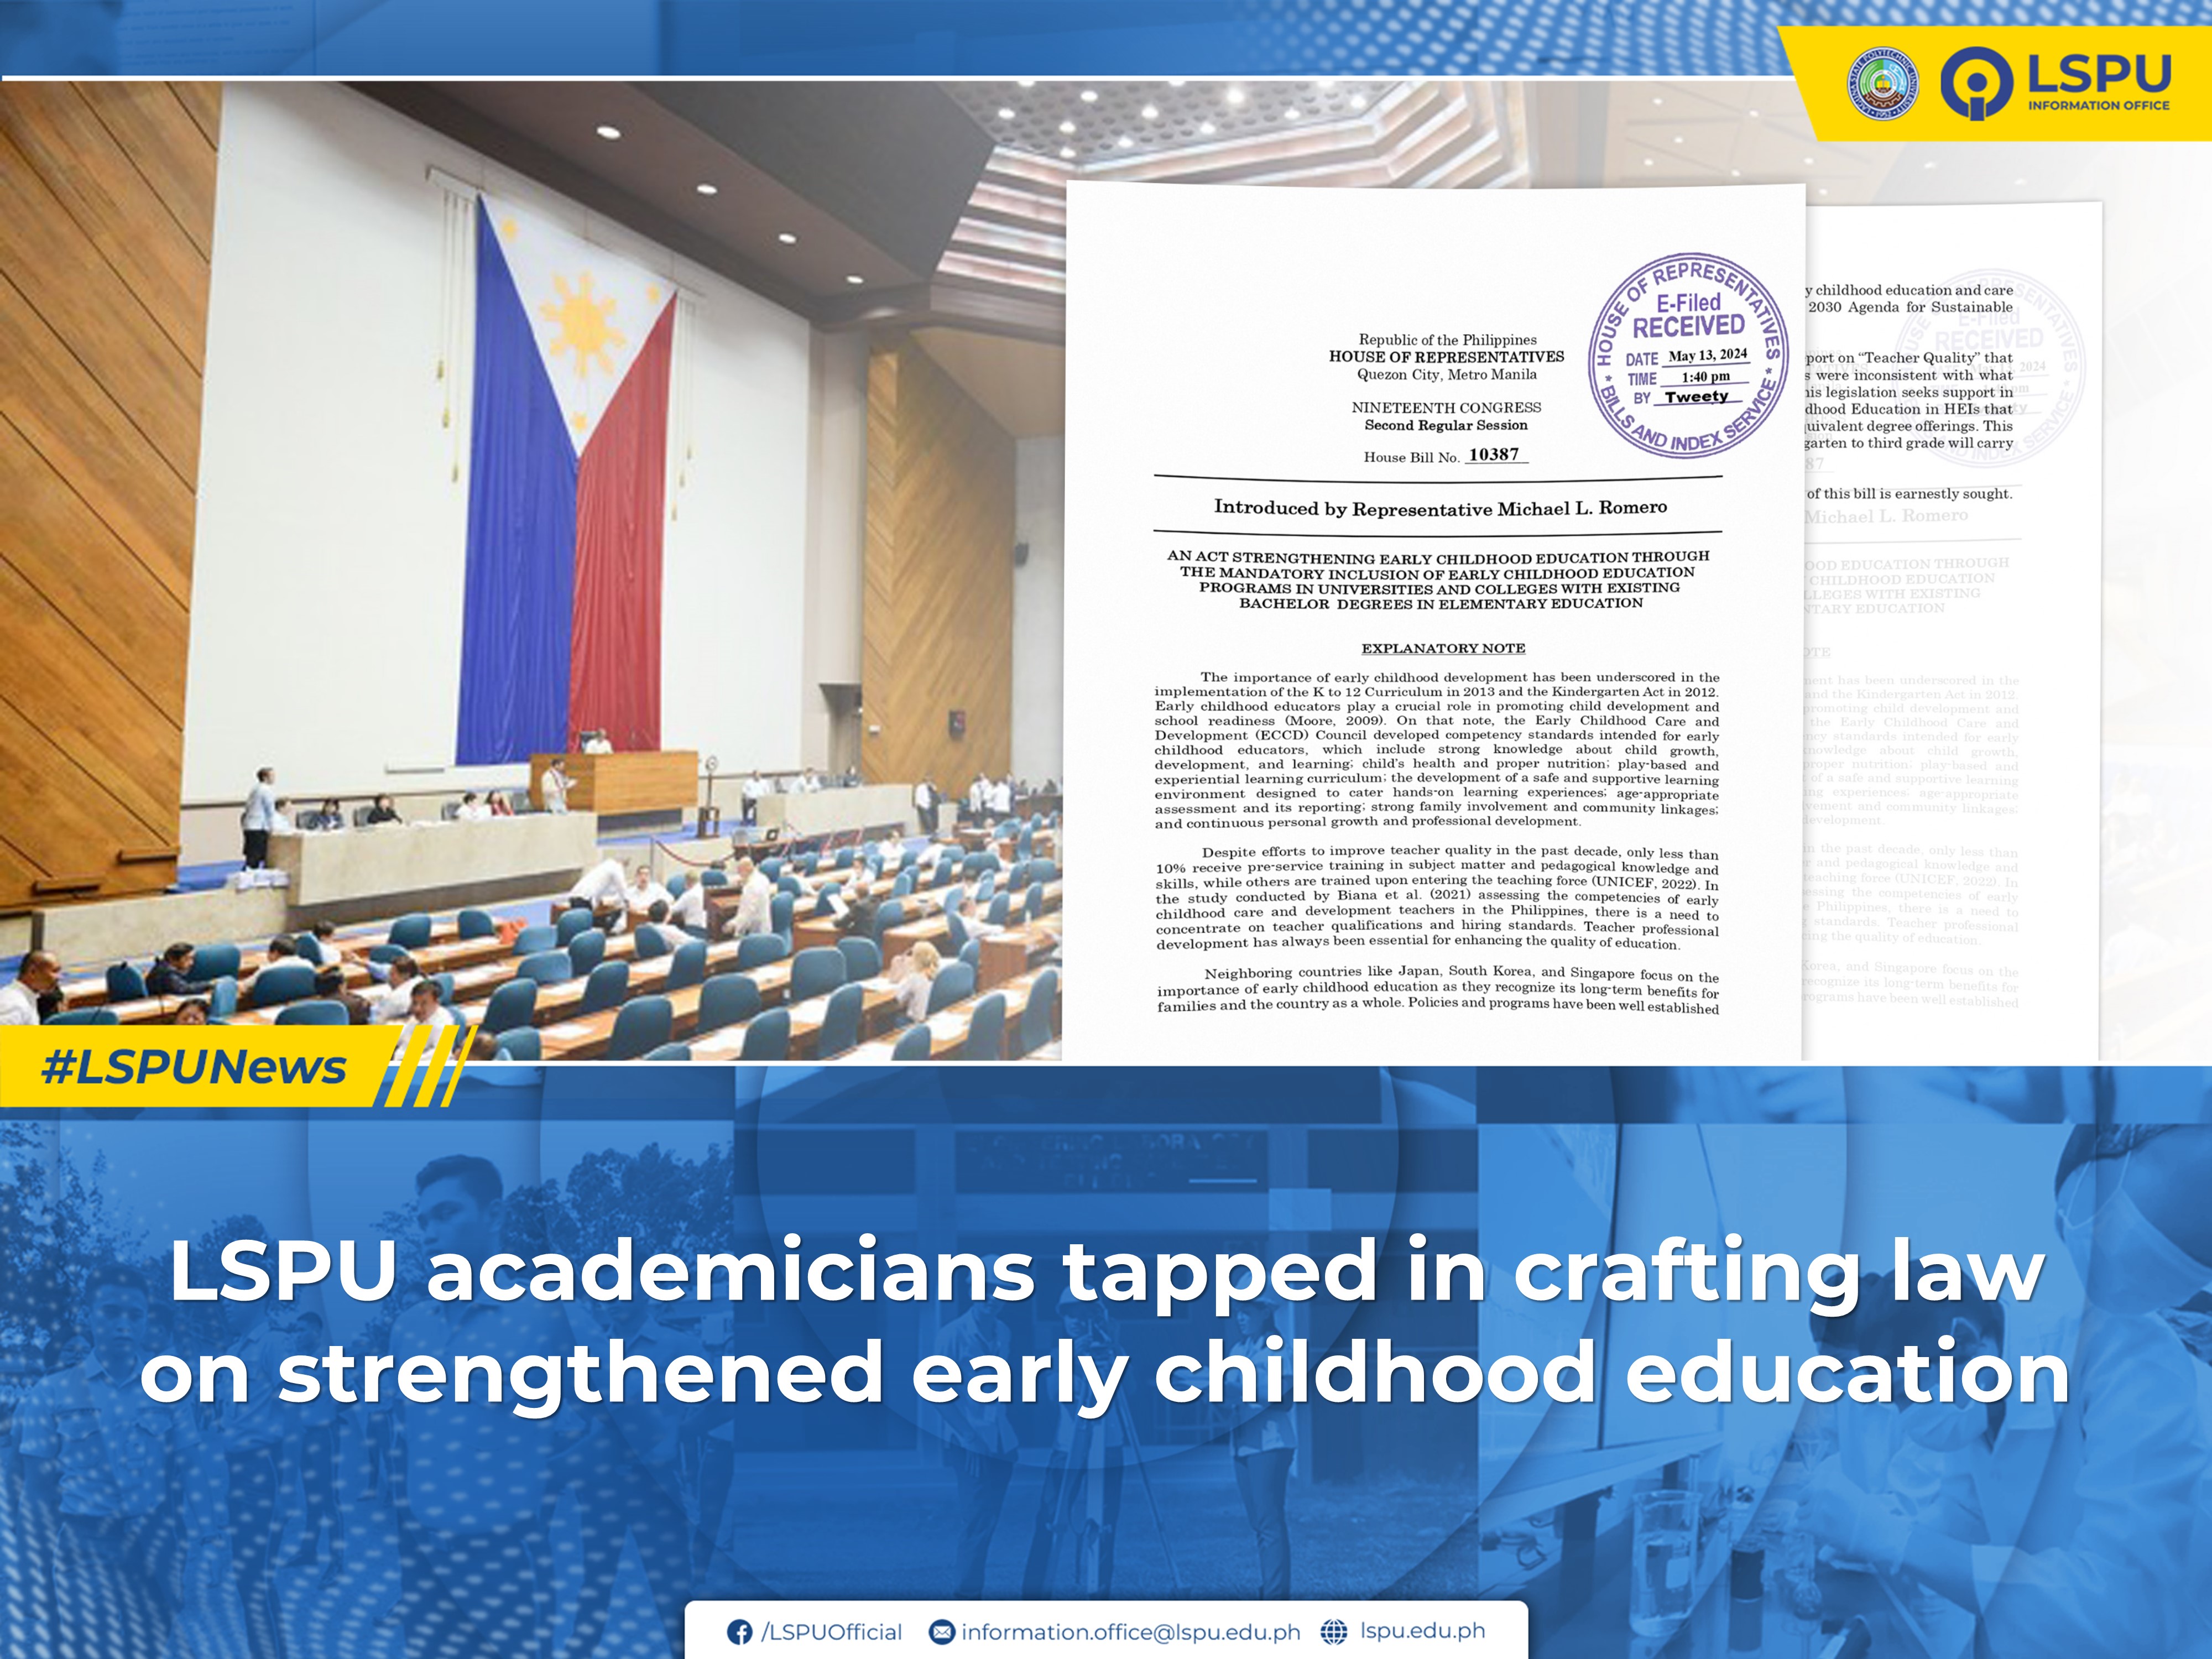 LSPU academicians tapped in crafting law on strengthened early childhood education